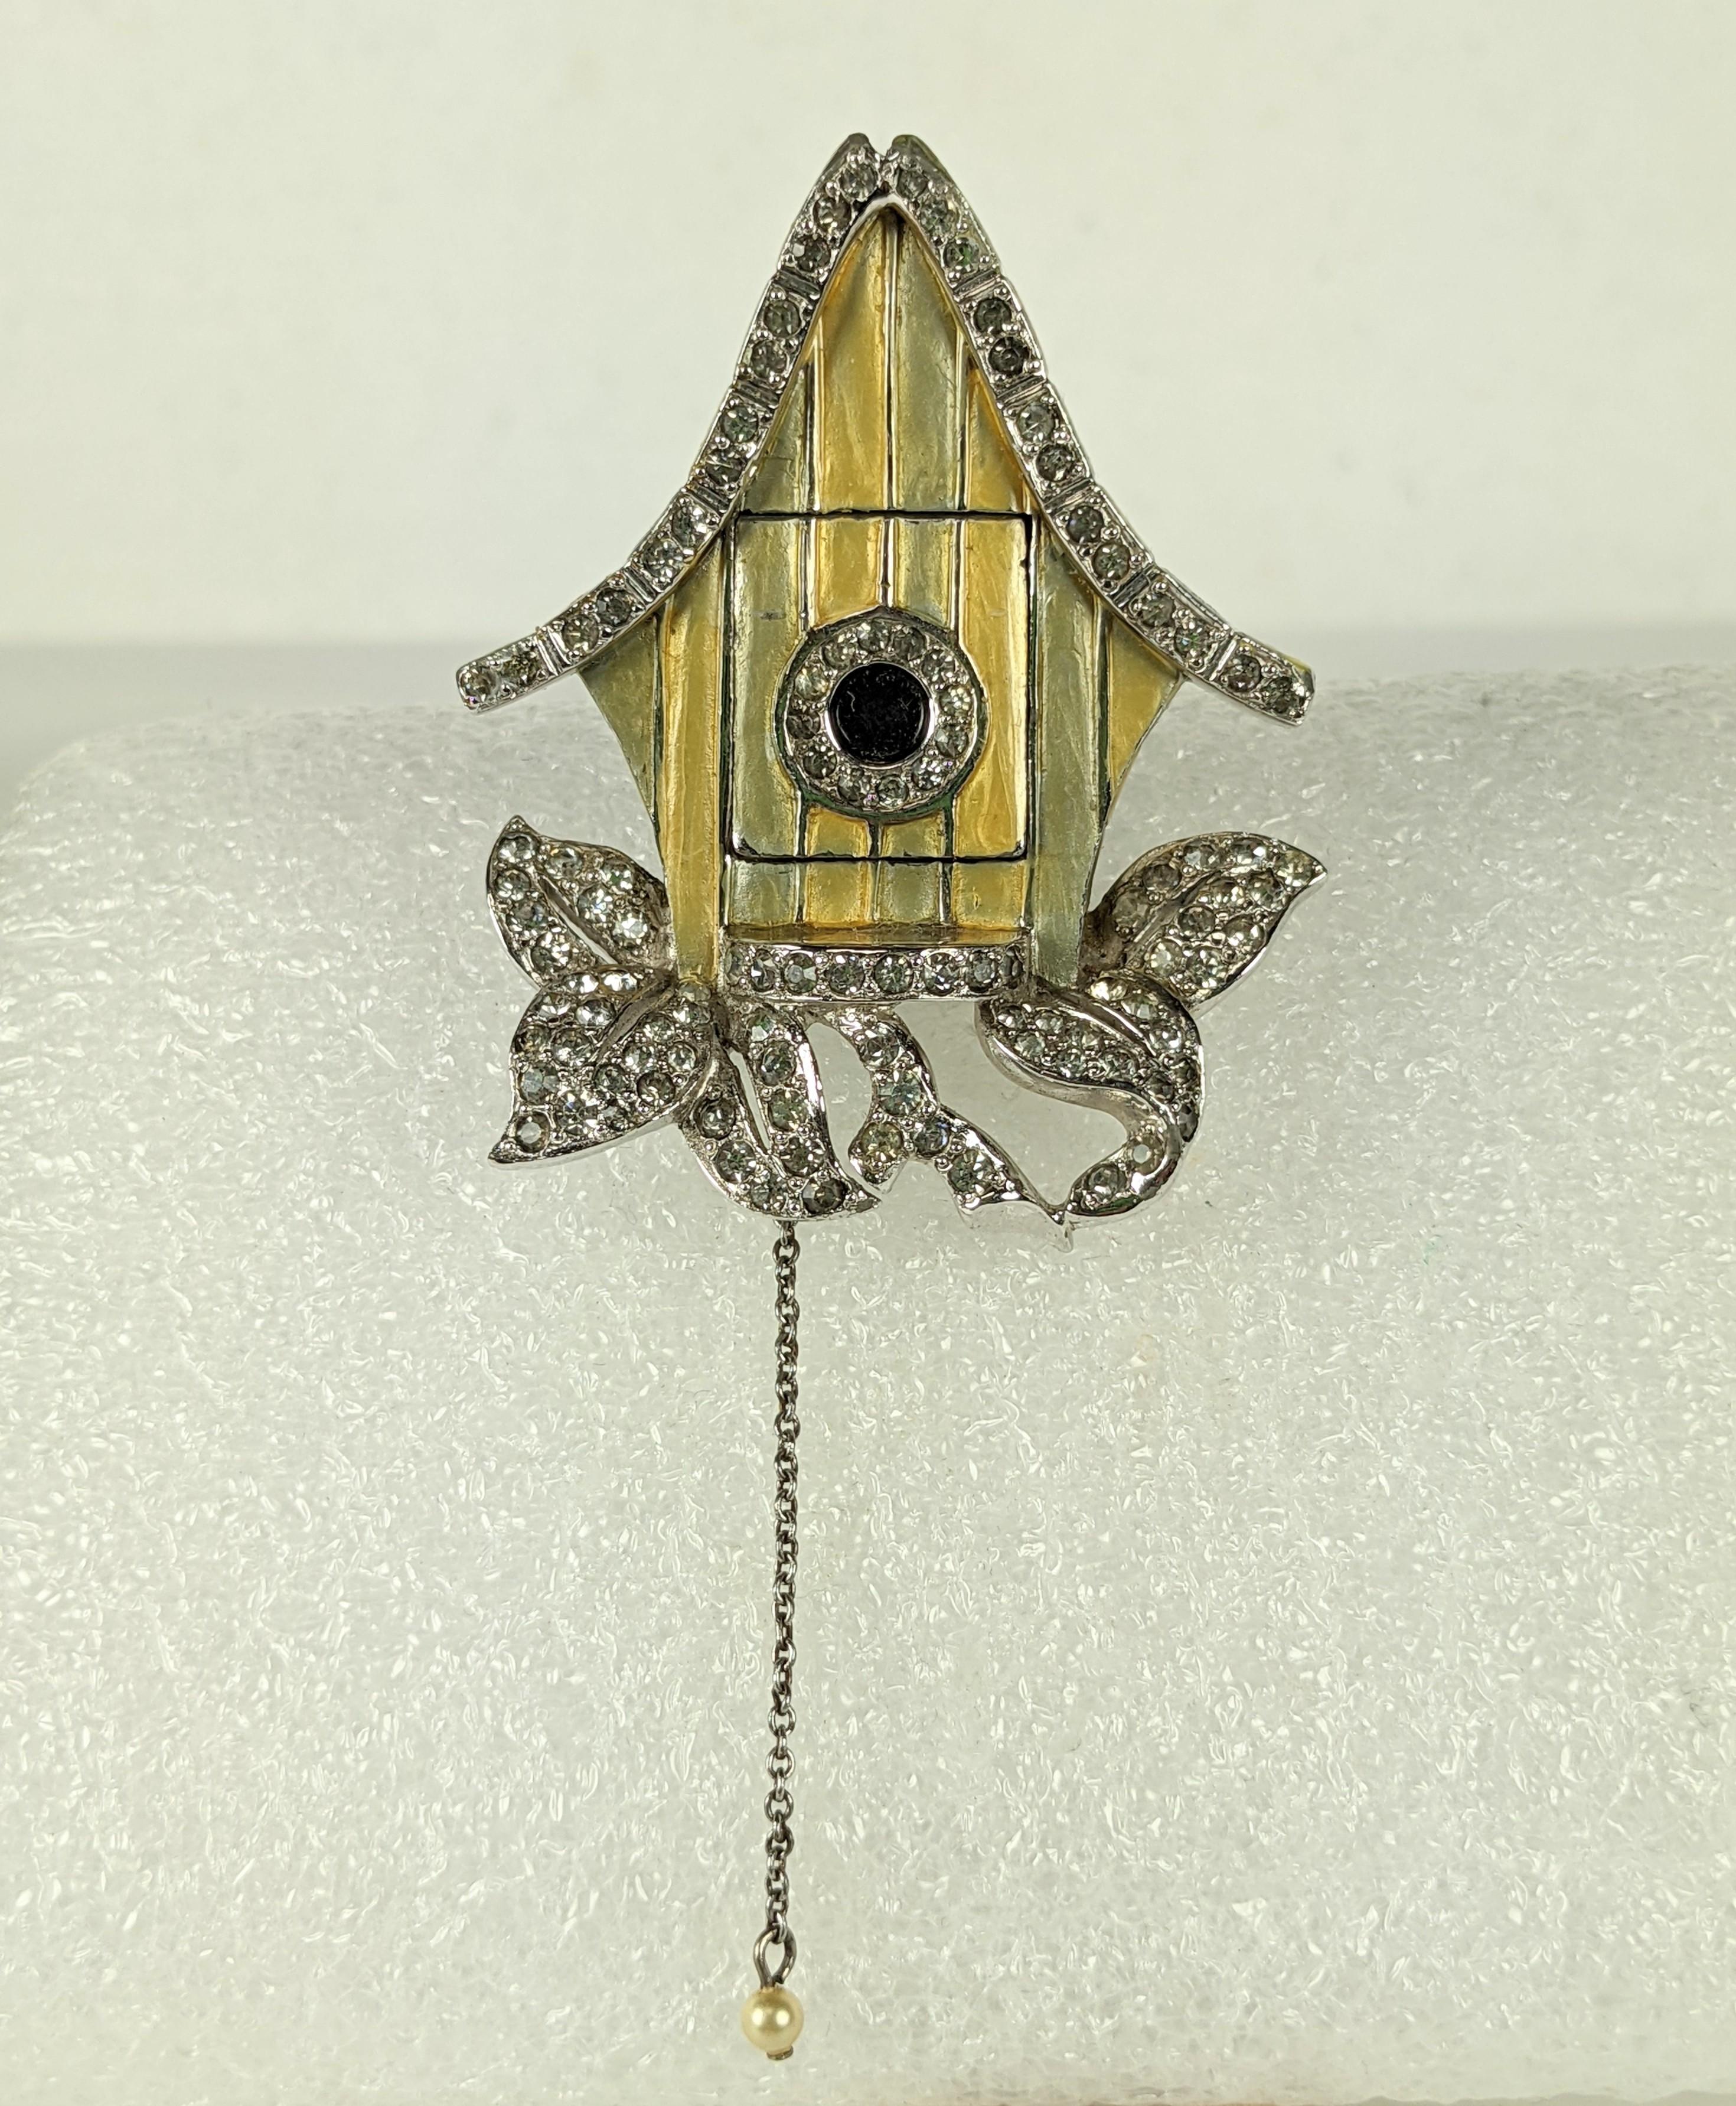 Rare Marcel Boucher pave rhinestone and enamel mechanical trembler cuckoo clock clip brooch.
In a pale mint green and  lemon yellow pearlized enamel, crystal rhinestone pave, rhodium plated base metal, with faux pearl  drop on the silvered metal